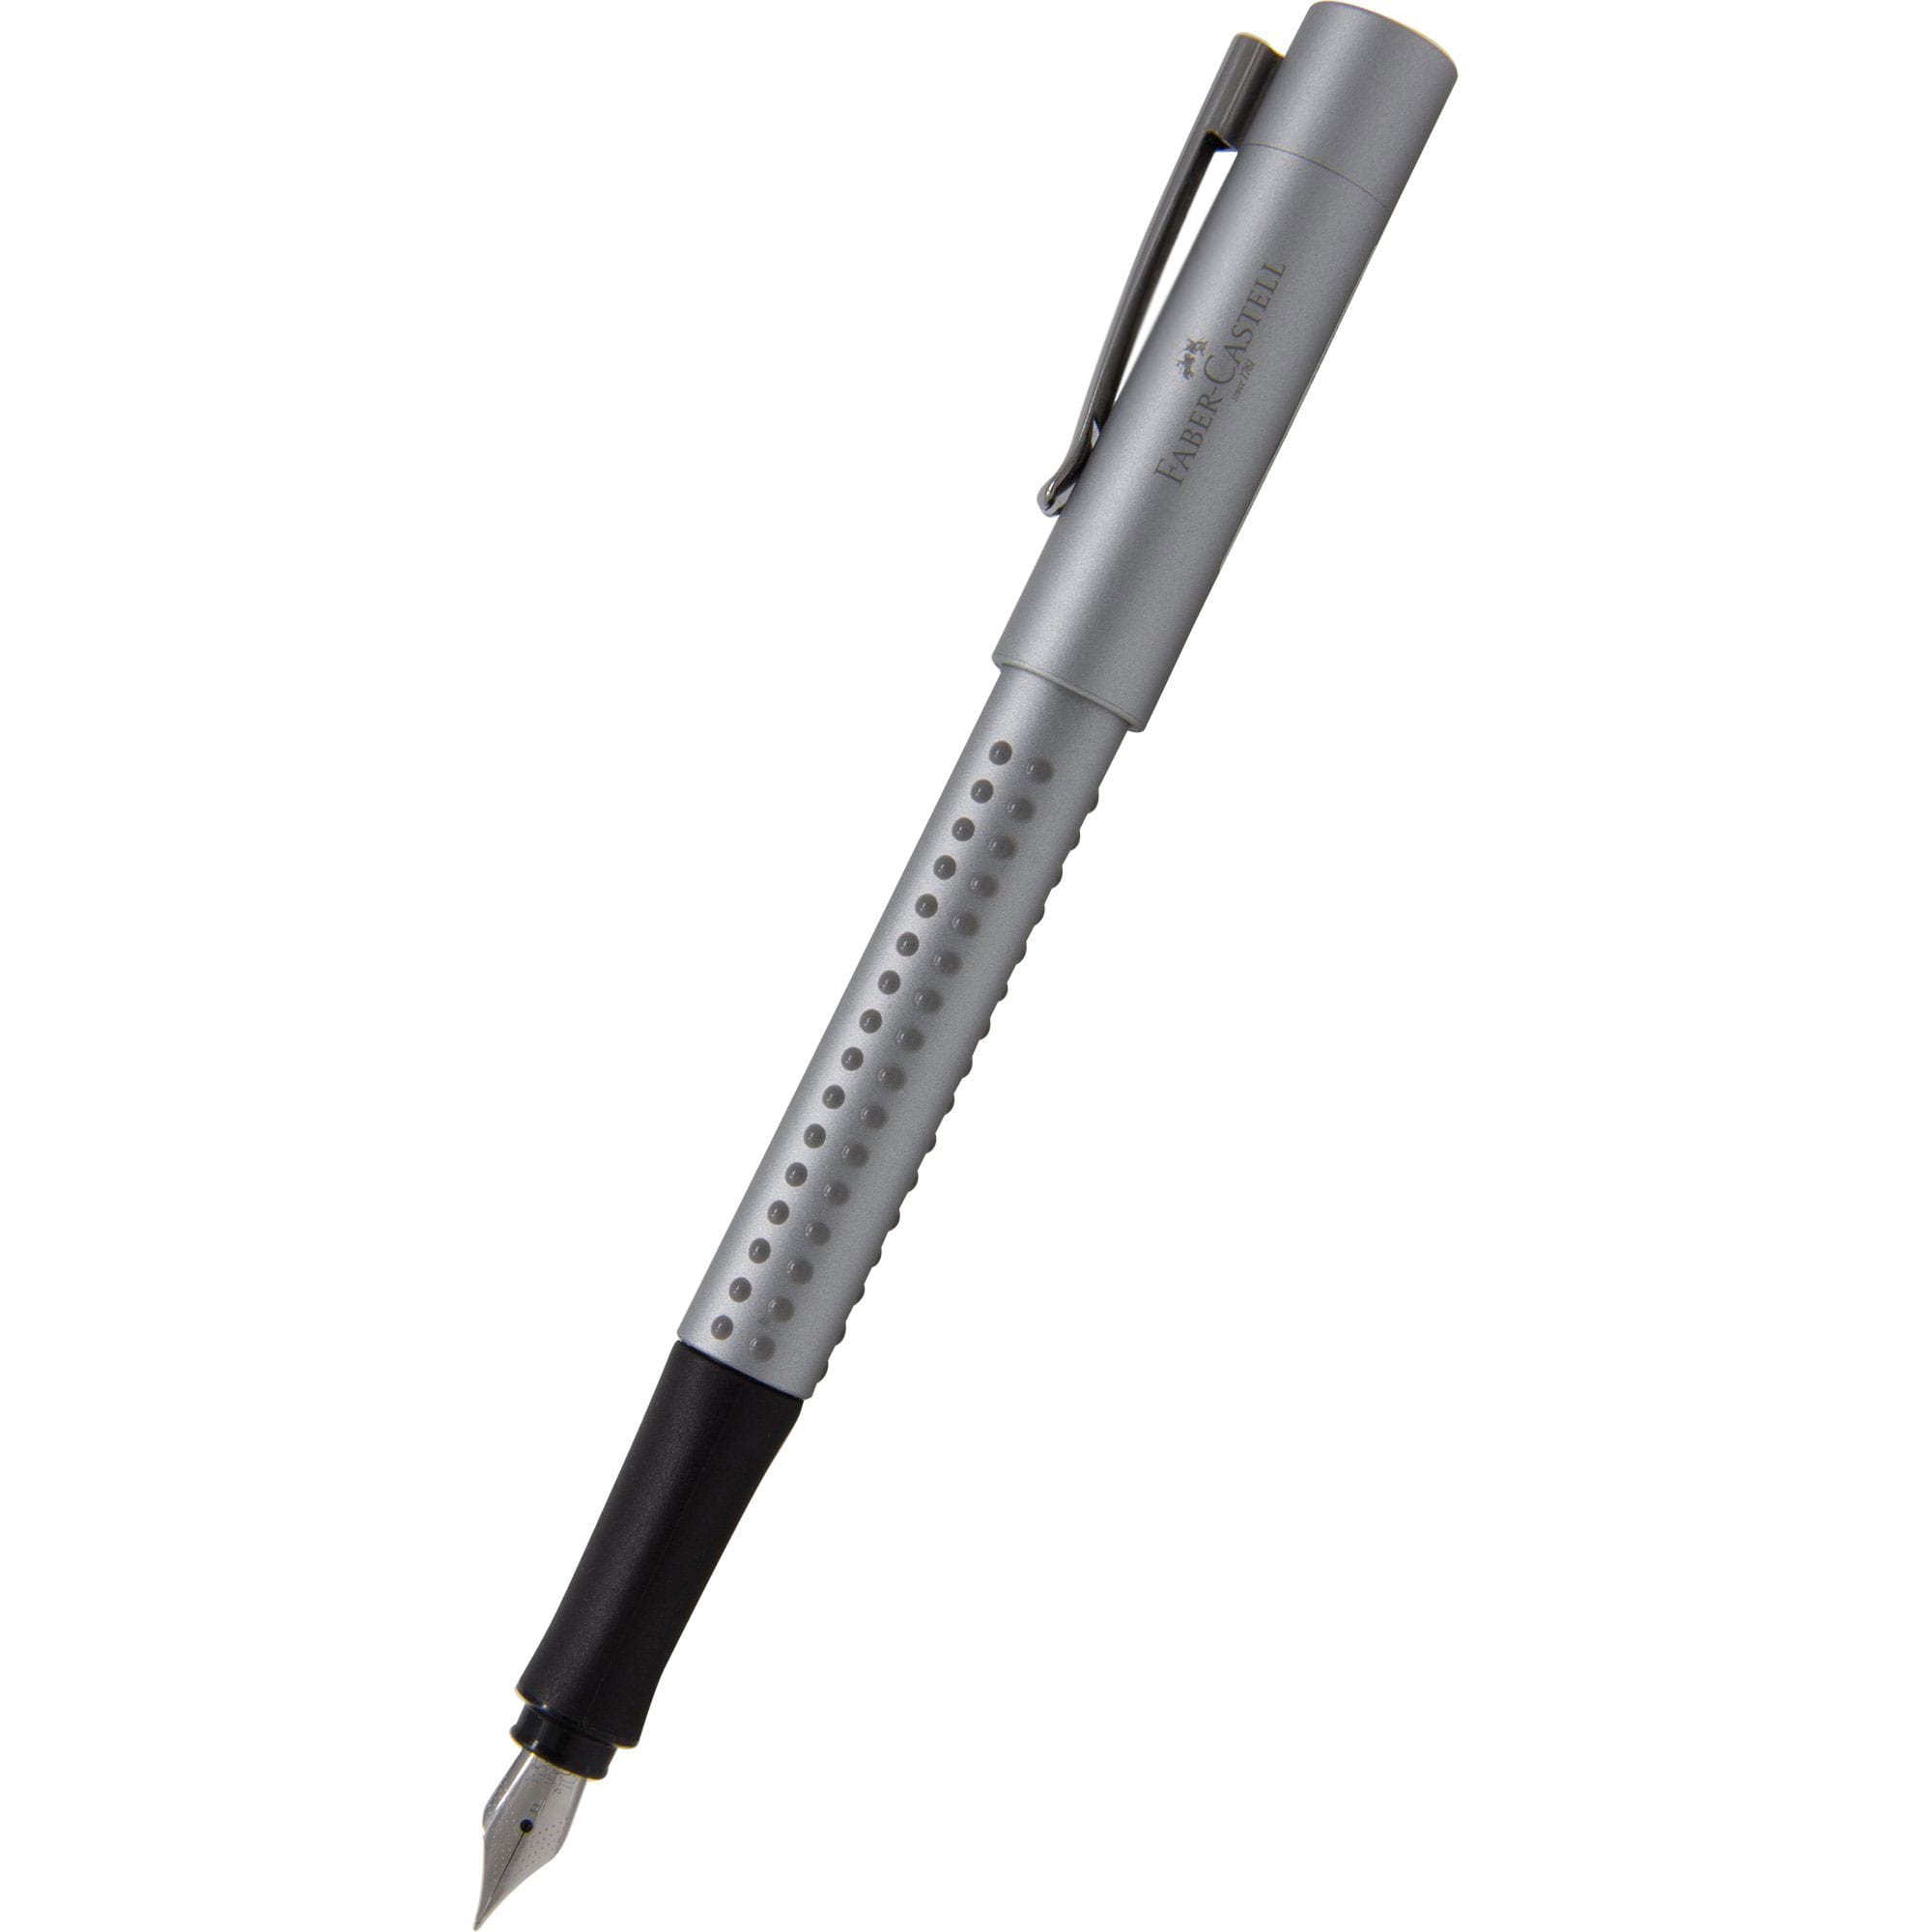 Faber-Castell Grip Edition F Fountain Pen - All Black